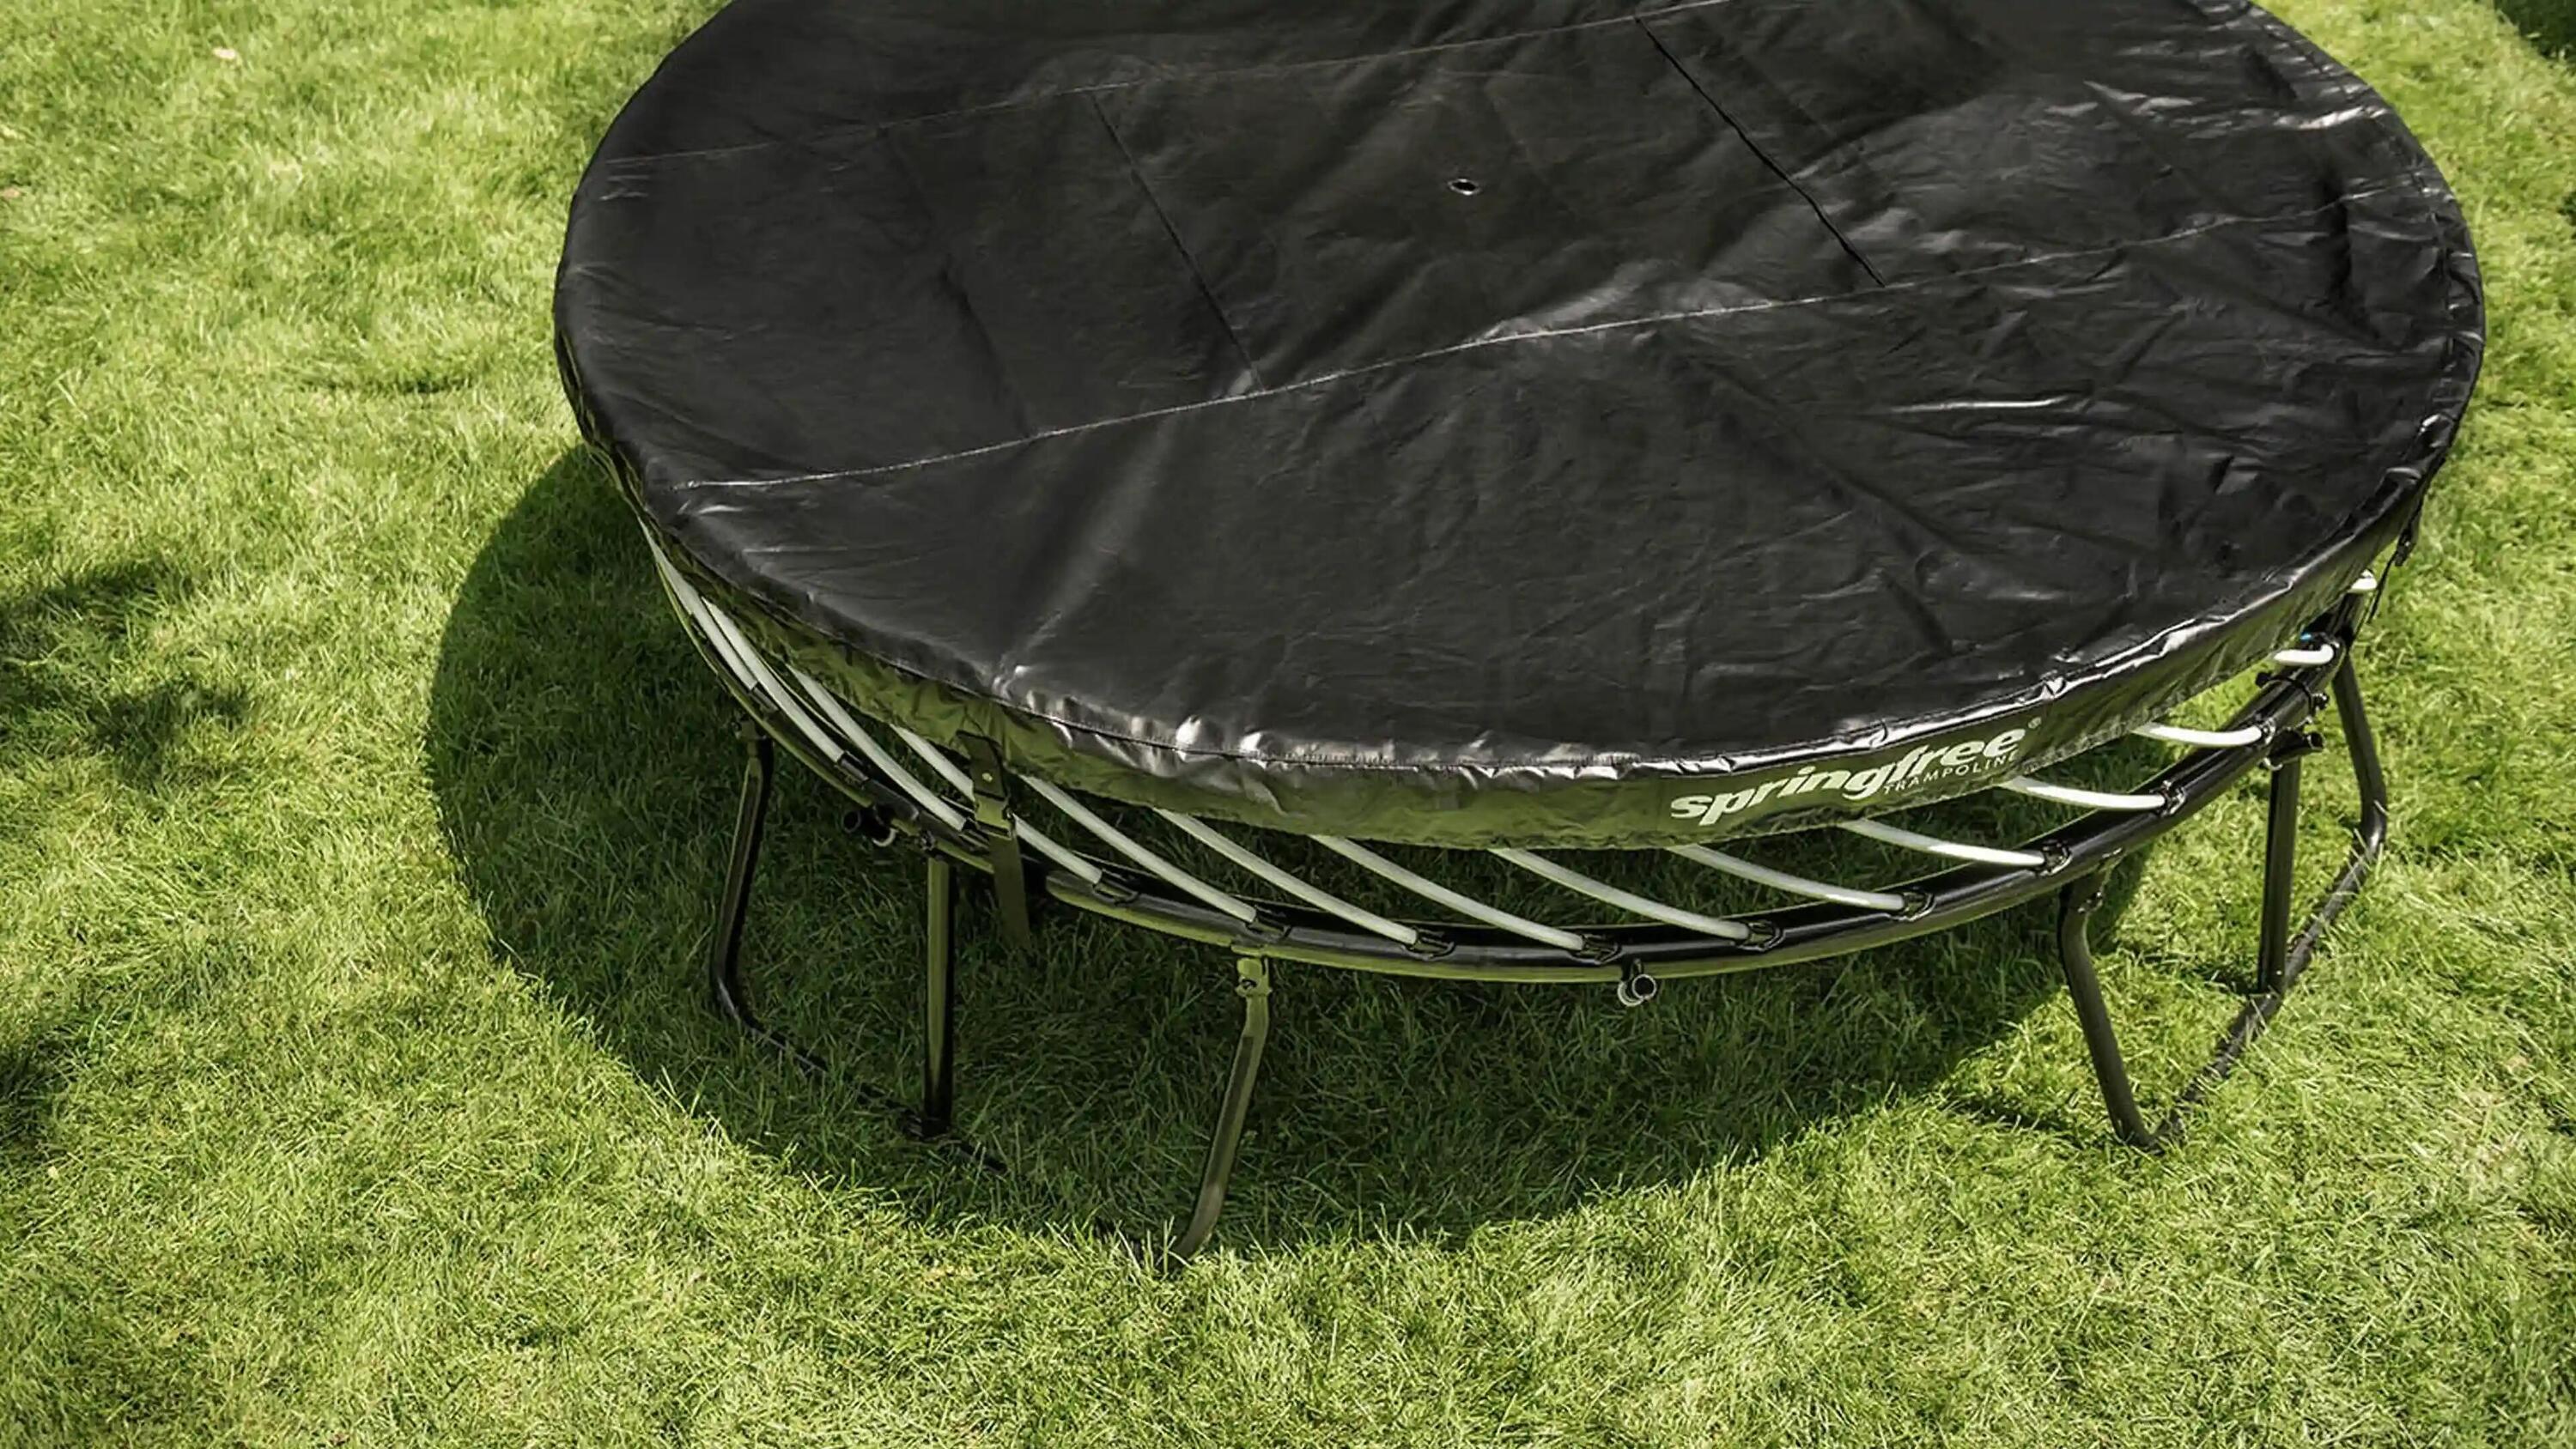 Springfree Trampoline All-Weather Cover for Compact Round 2/3